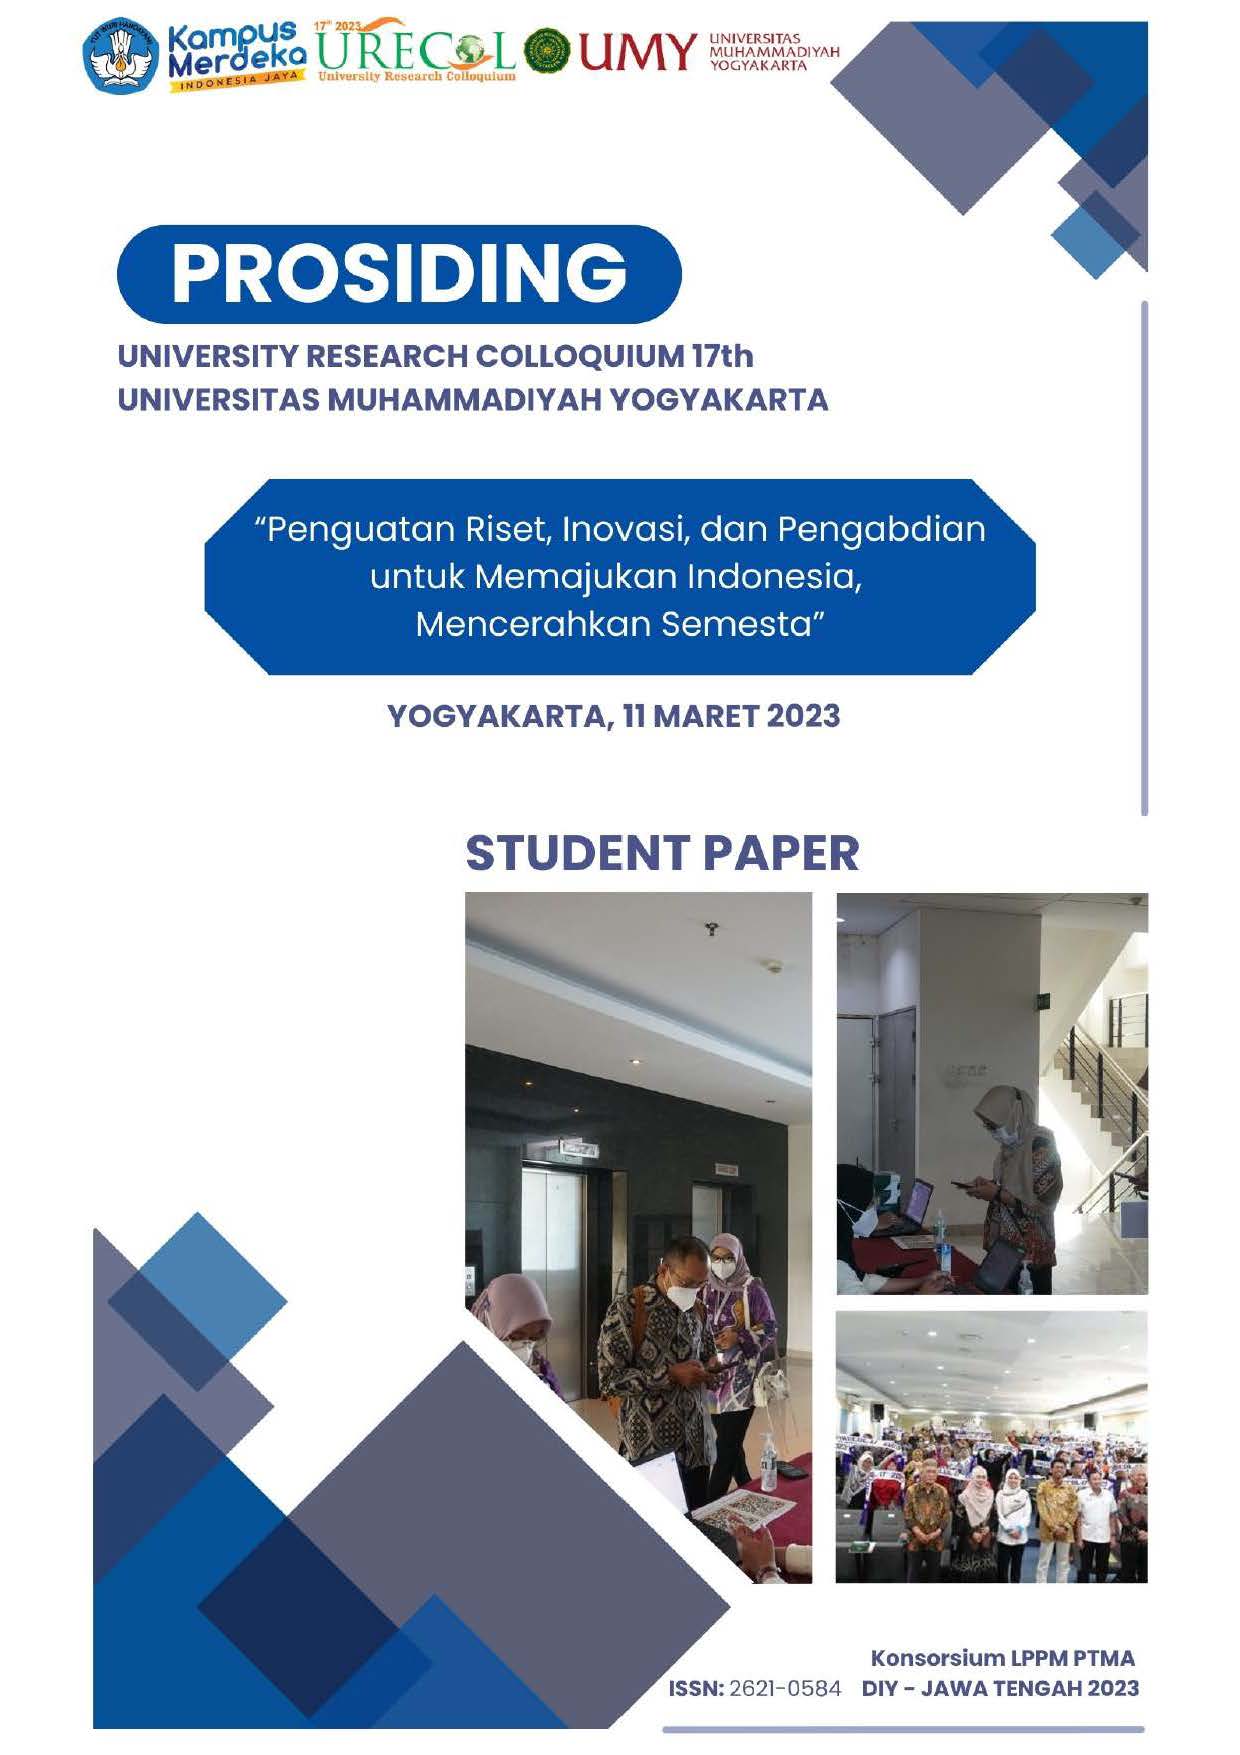 					View Proceeding of The 17th University Research Colloquium 2023: Mahasiswa (Student Paper Presentation)
				